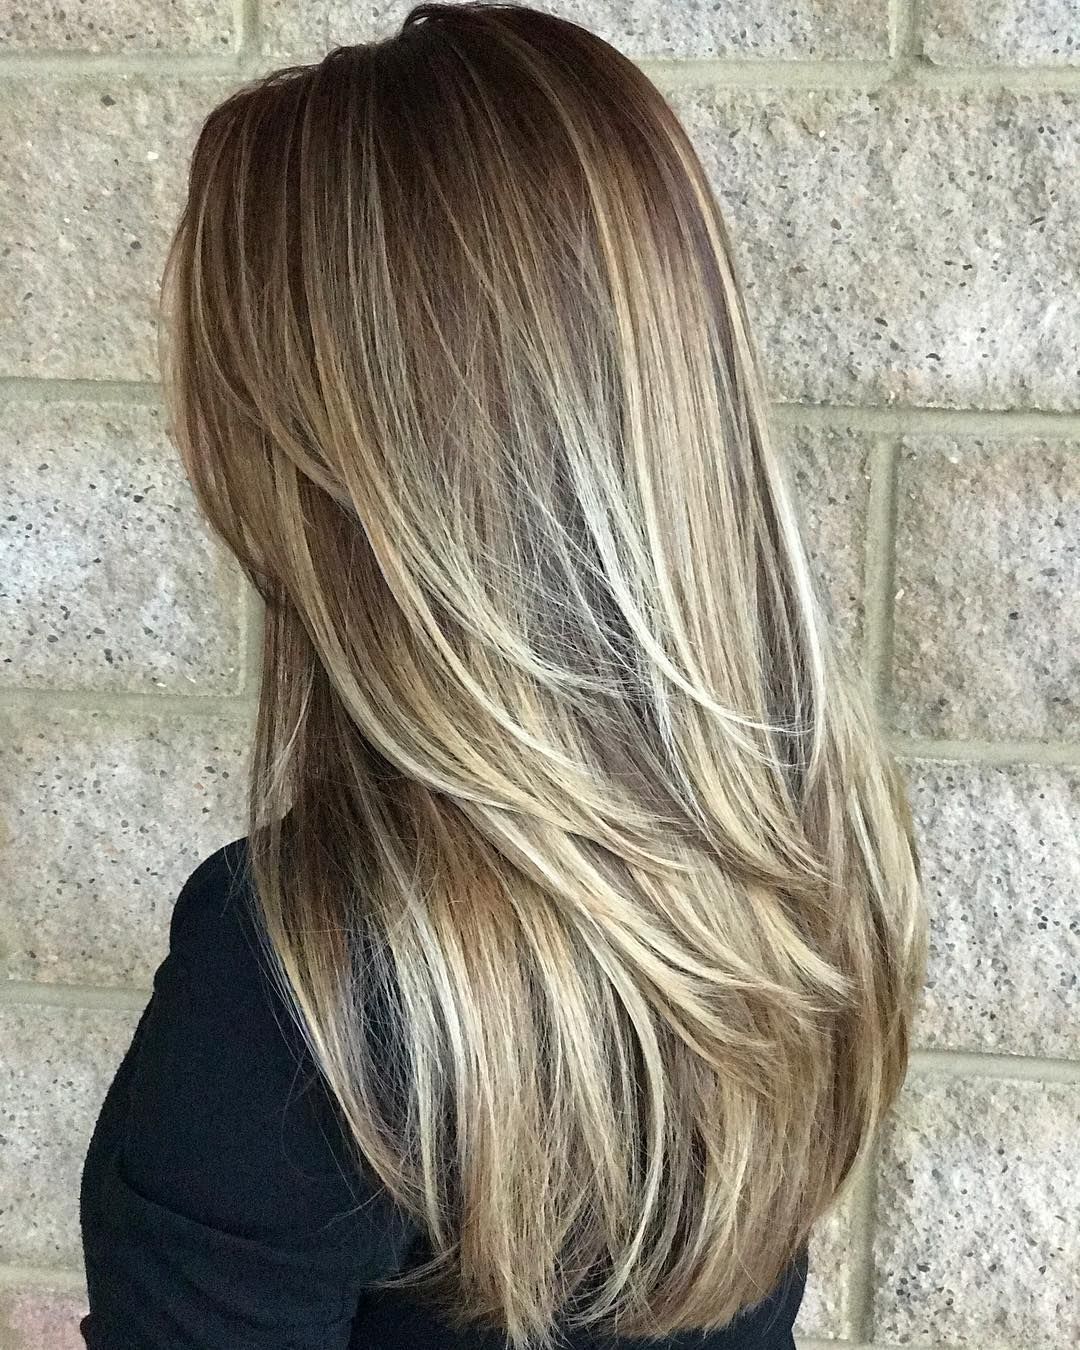 Trendy Hairstyles And Haircuts For Long Layered Hair To Rock In 2019 -   11 hair Layered balayage ideas